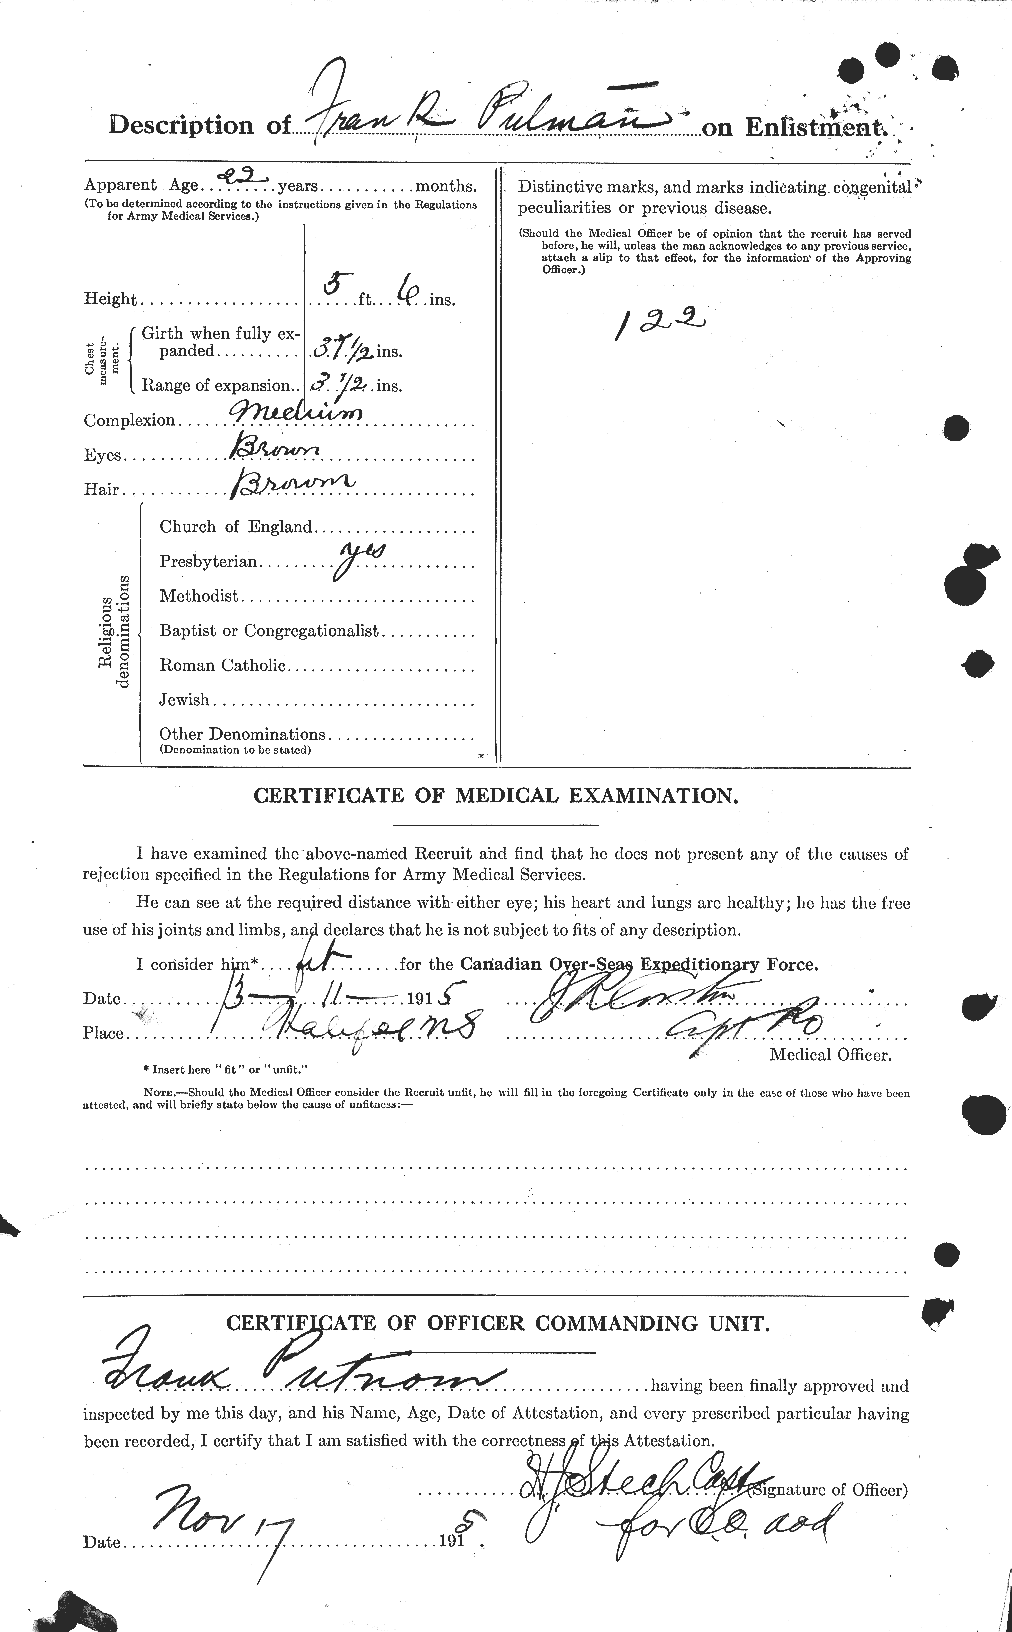 Personnel Records of the First World War - CEF 591728b